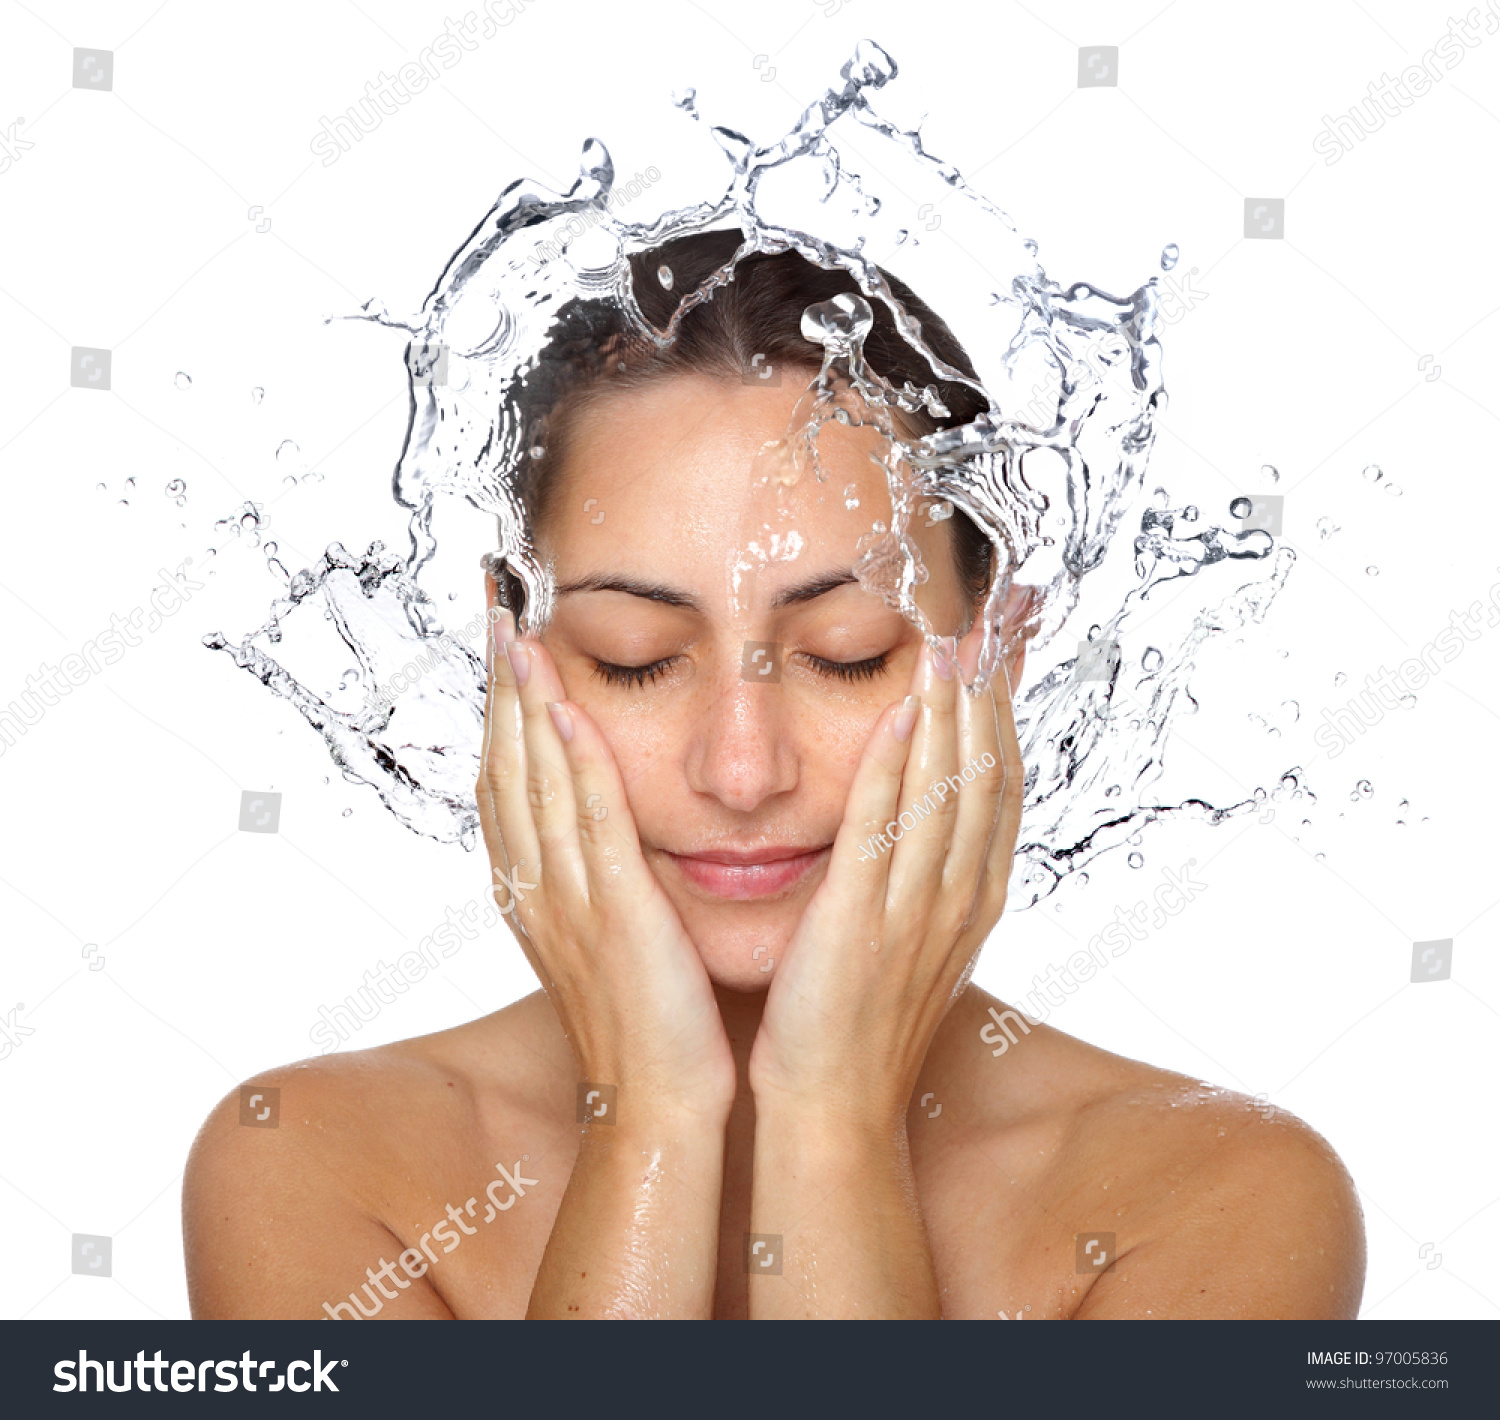 Beautiful Wet Woman Face With Water Drop Close Up Portrait On White